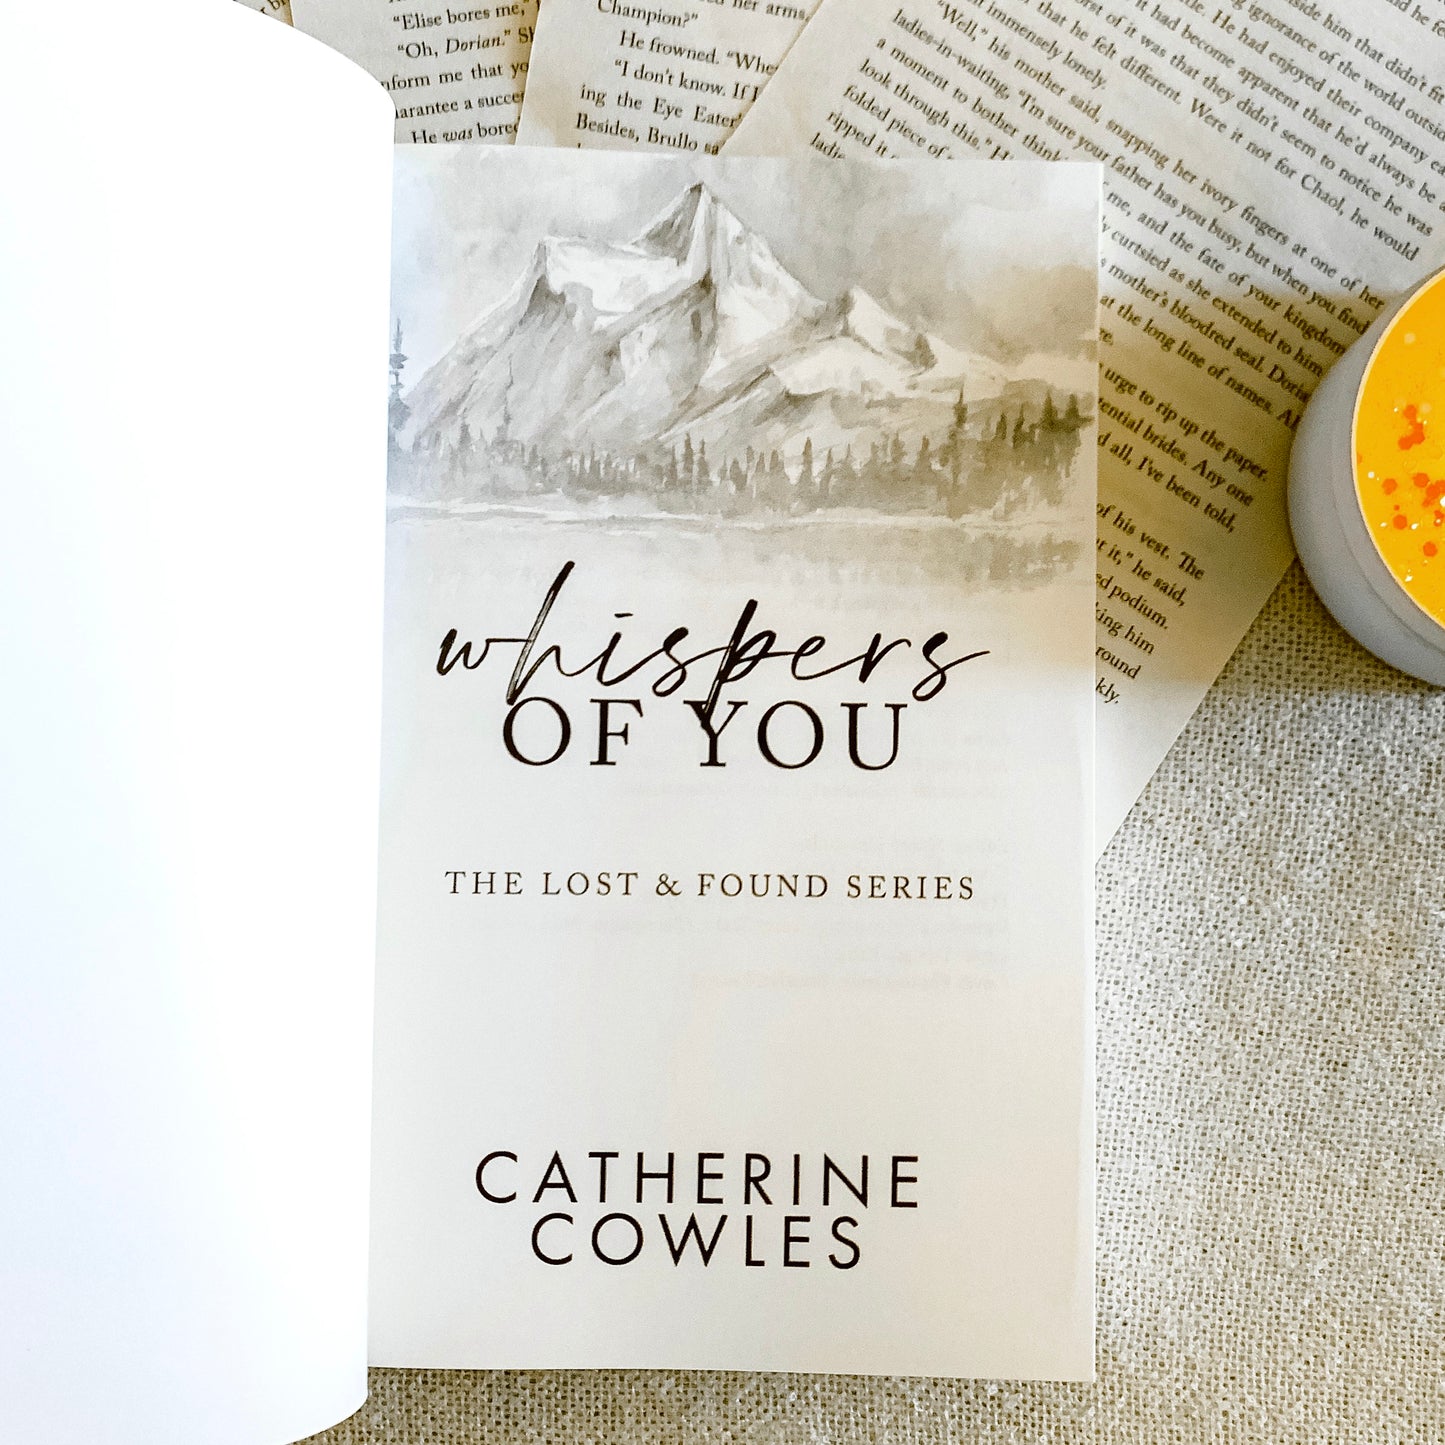 The Lost and Found series (Special Editions) by Catherine Cowles